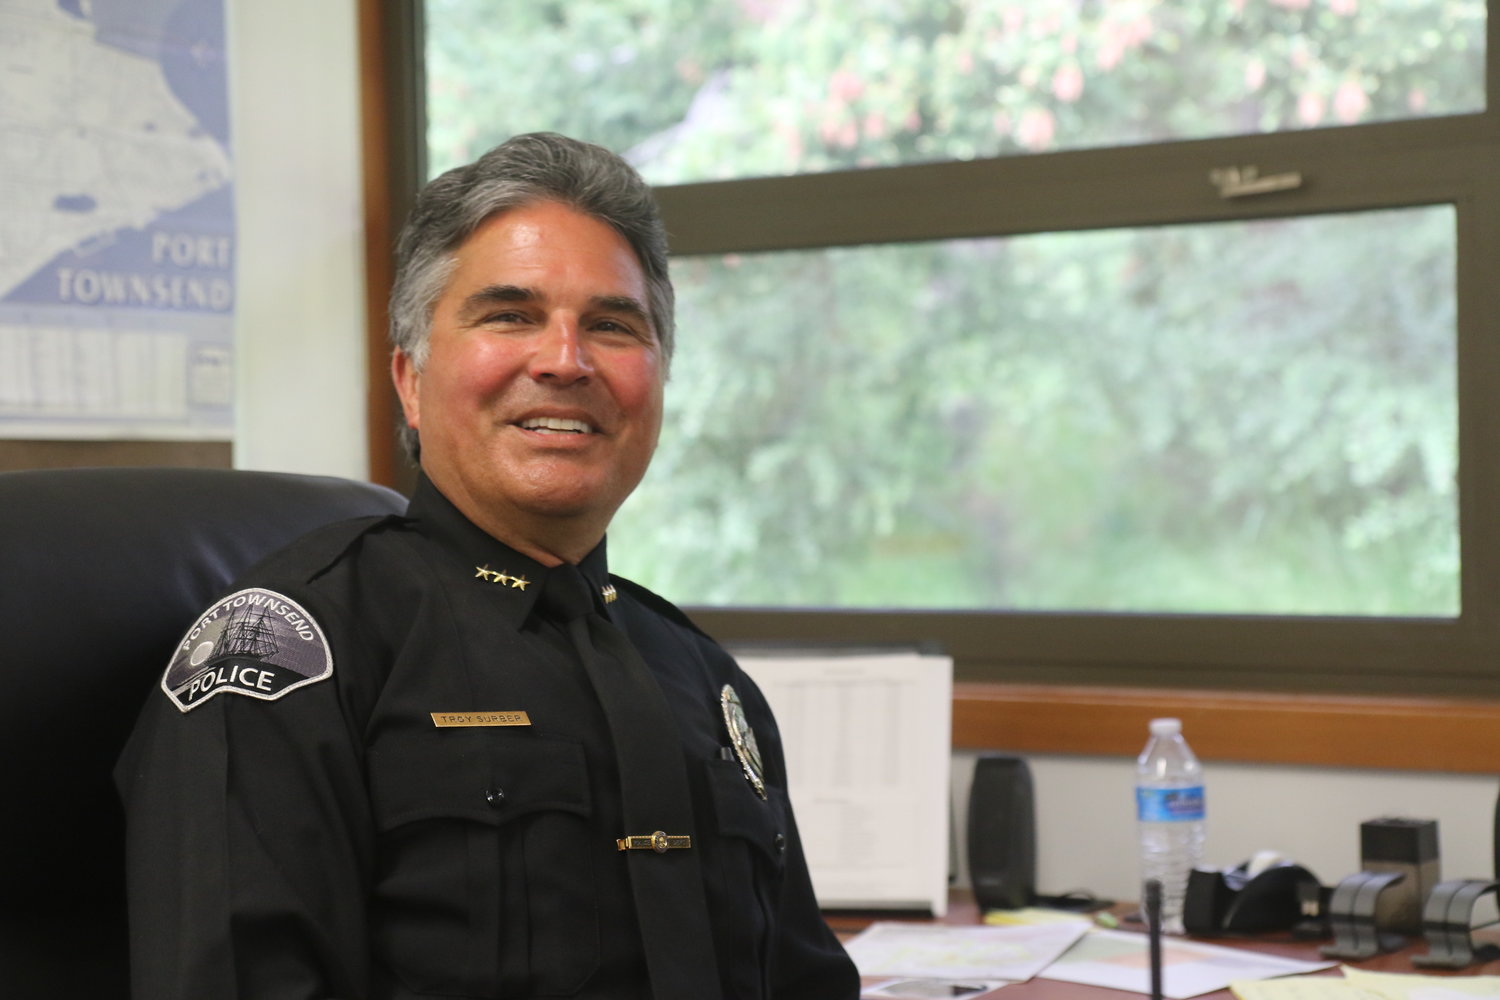 After 24 years with the department, Police Chief Troy Surber retired Monday, May 17